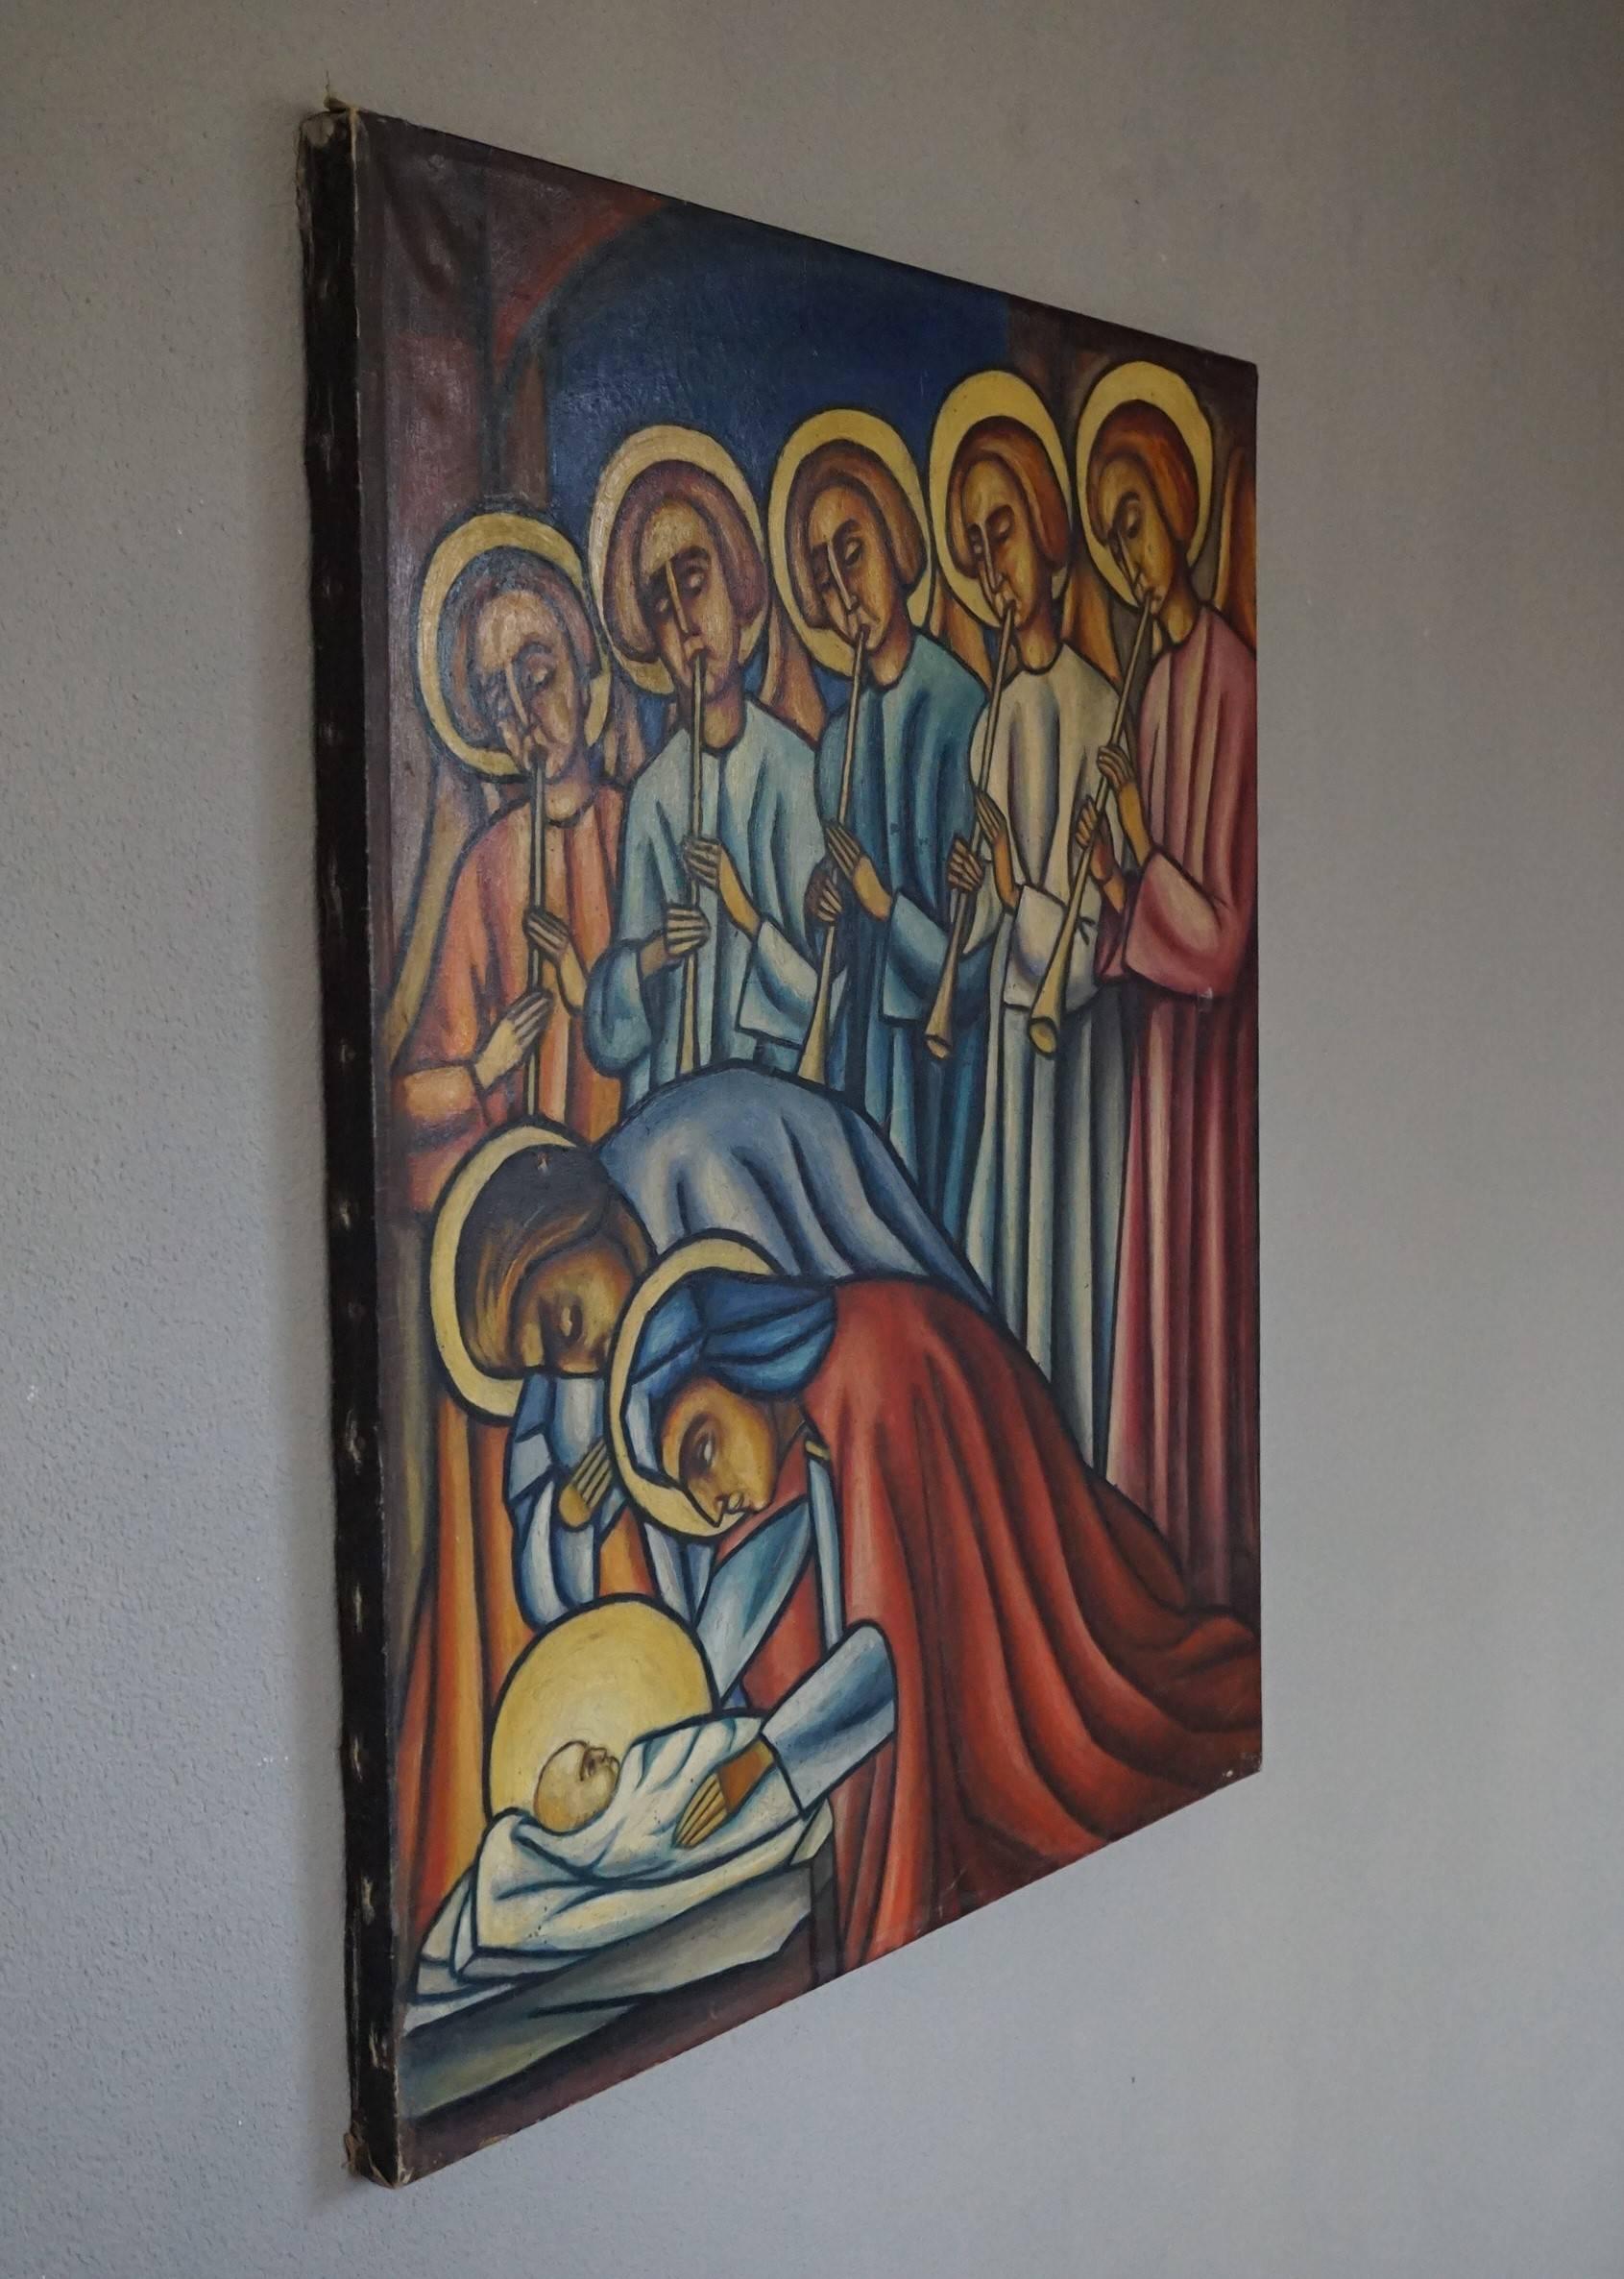 Rare oil on canvas 'Christmas painting' with signature.

This one of a kind and meaningful 1920's Art Deco painting of the birth of Christ is a real joy to own and look at, especially around Christmas. We hardly ever see any original Art Deco